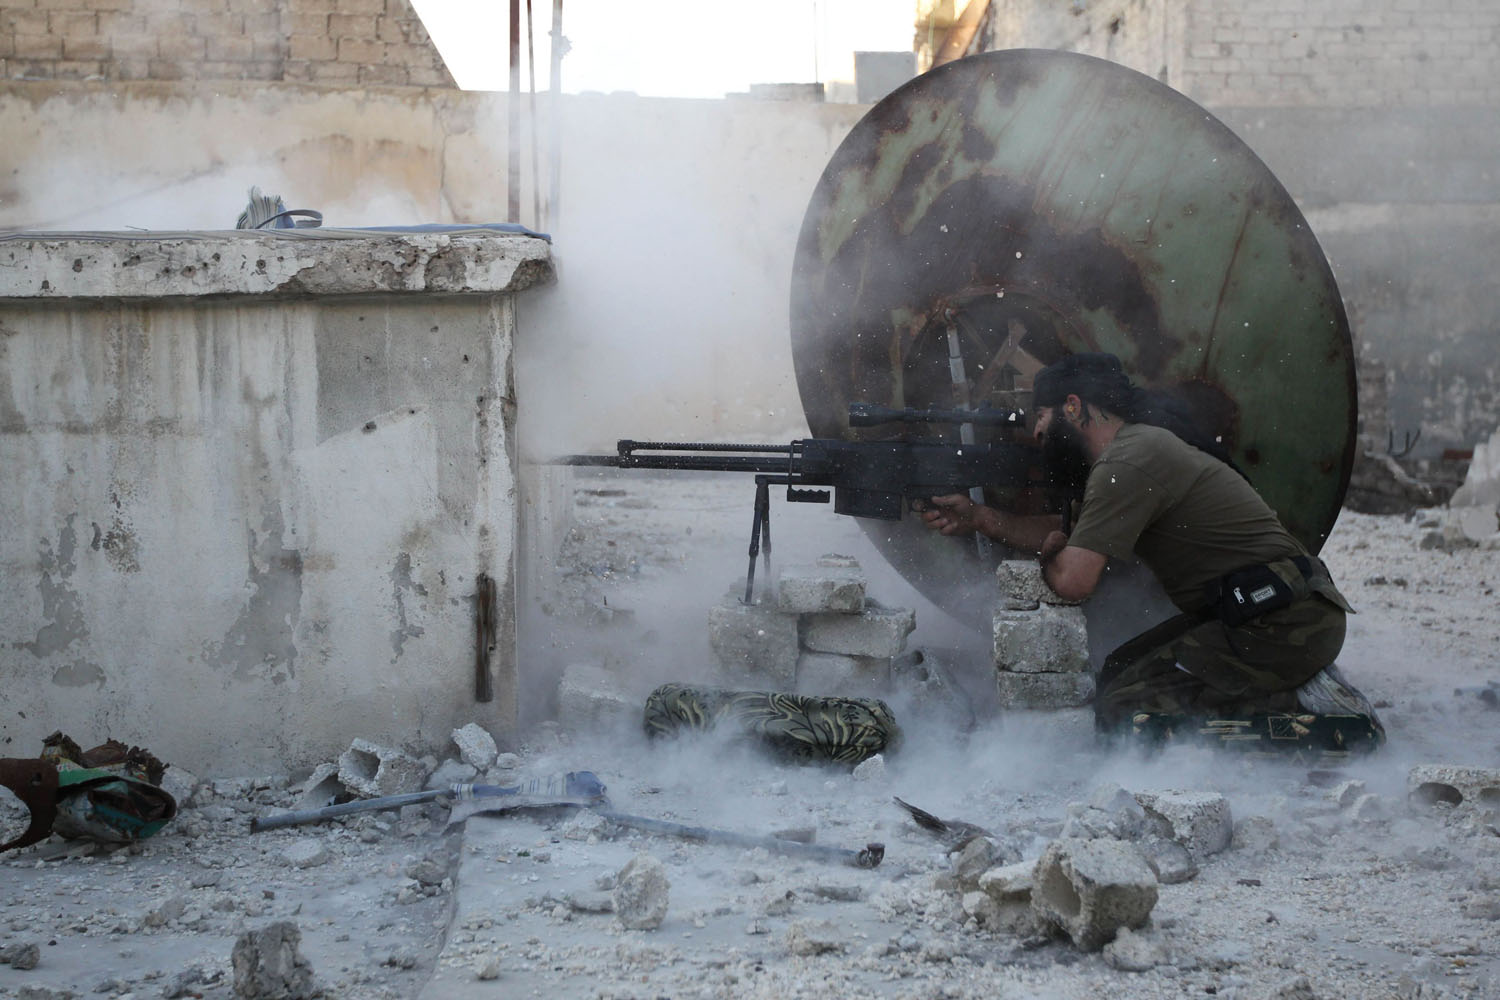 A member of the Free Syrian Army shoots back at a sniper during what activists said were clashes with pro-government forces in Aleppo's Karm al-Jabal district